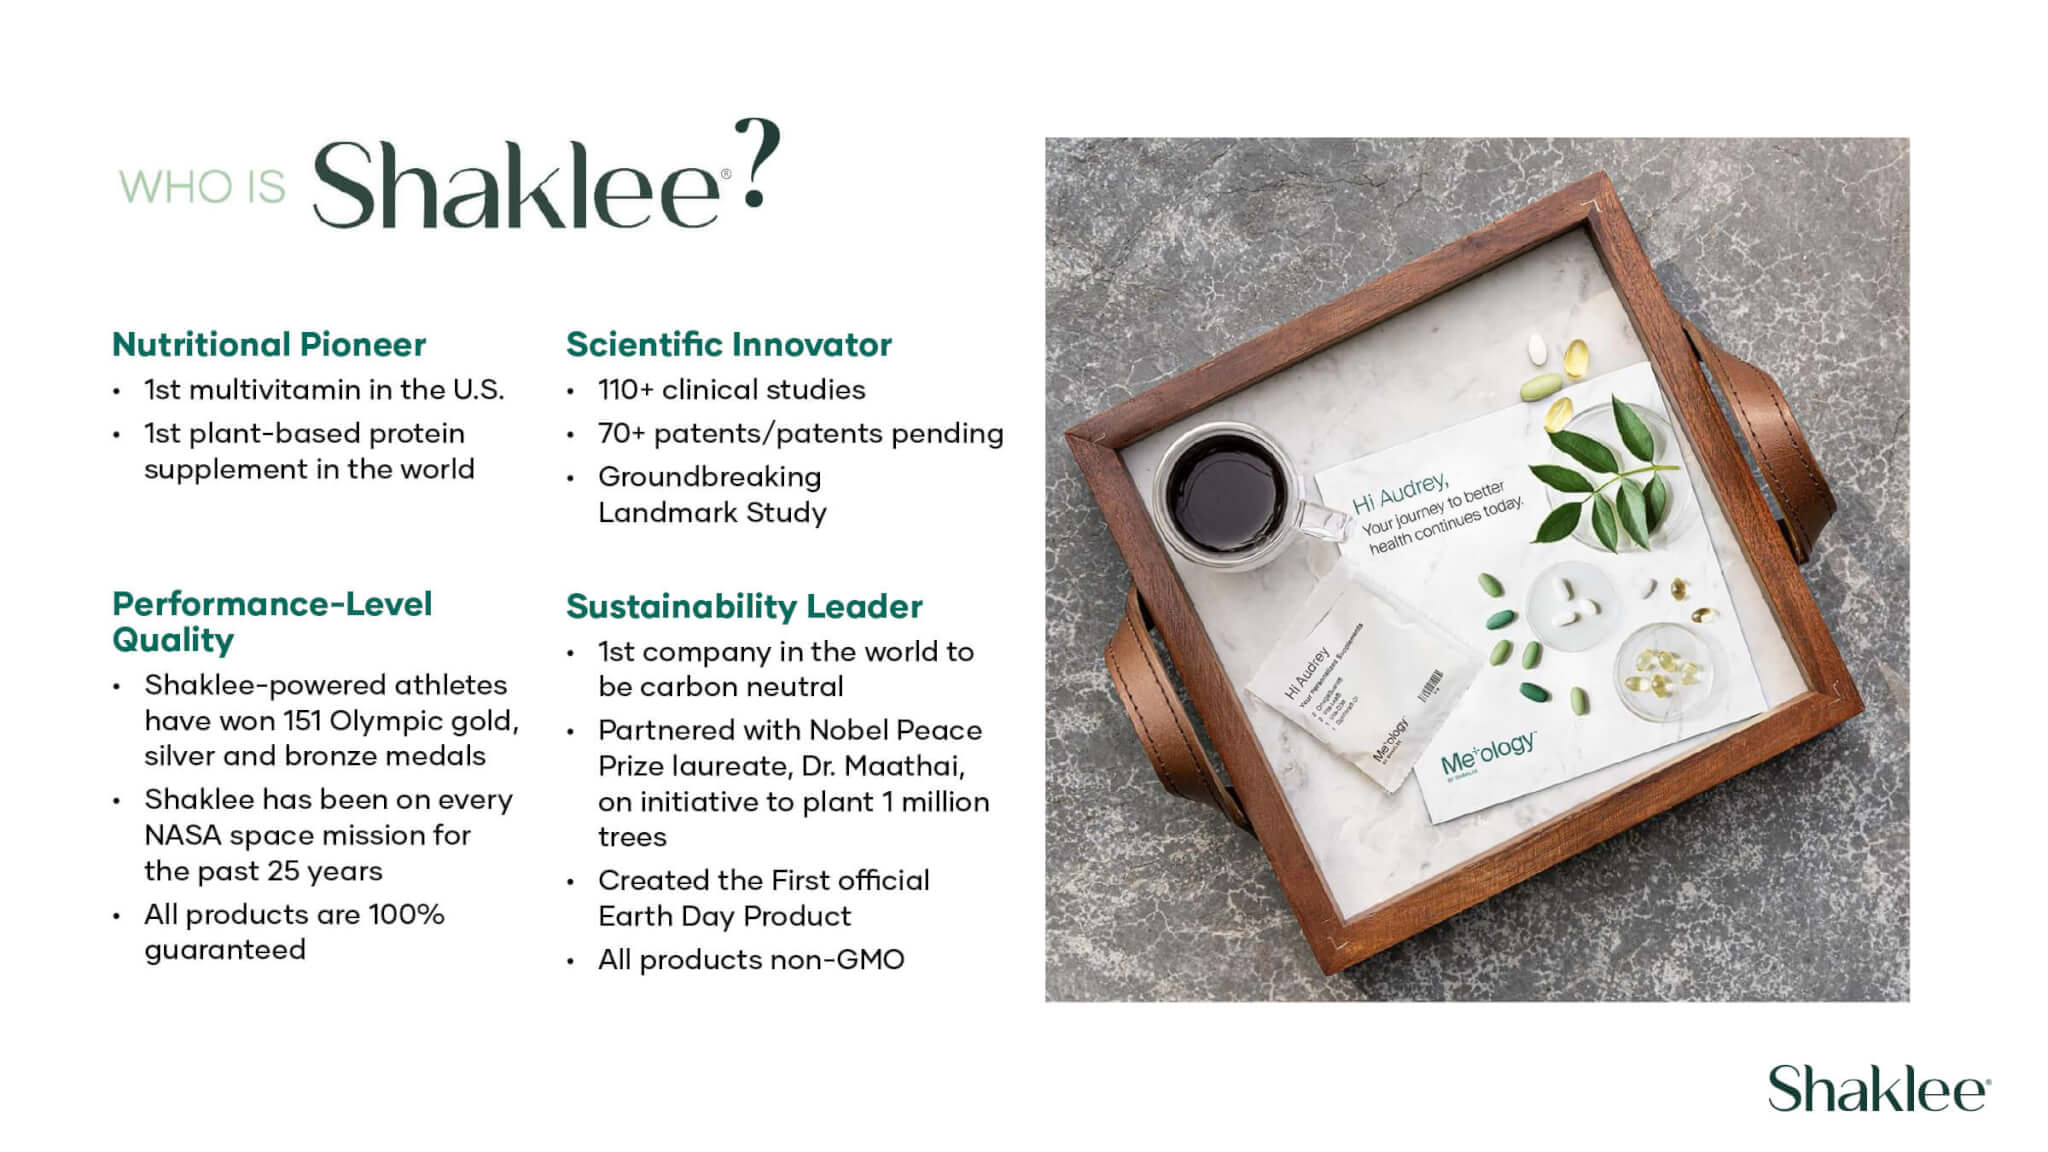 Shaklee. Where Health Meets Science Meets Nature.